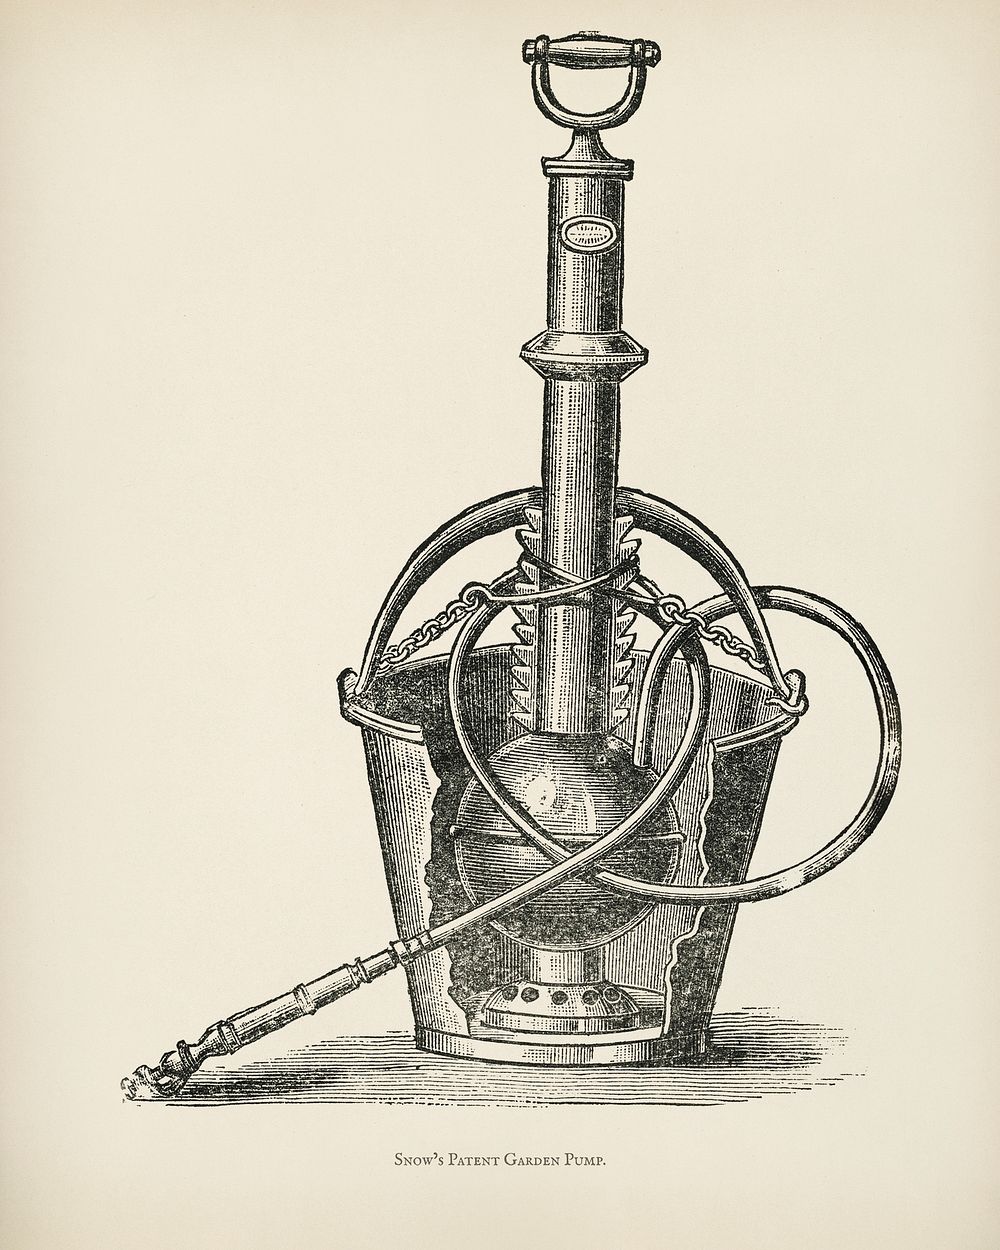 The fruit grower's guide : Vintage illustration of snow's patent garden pump